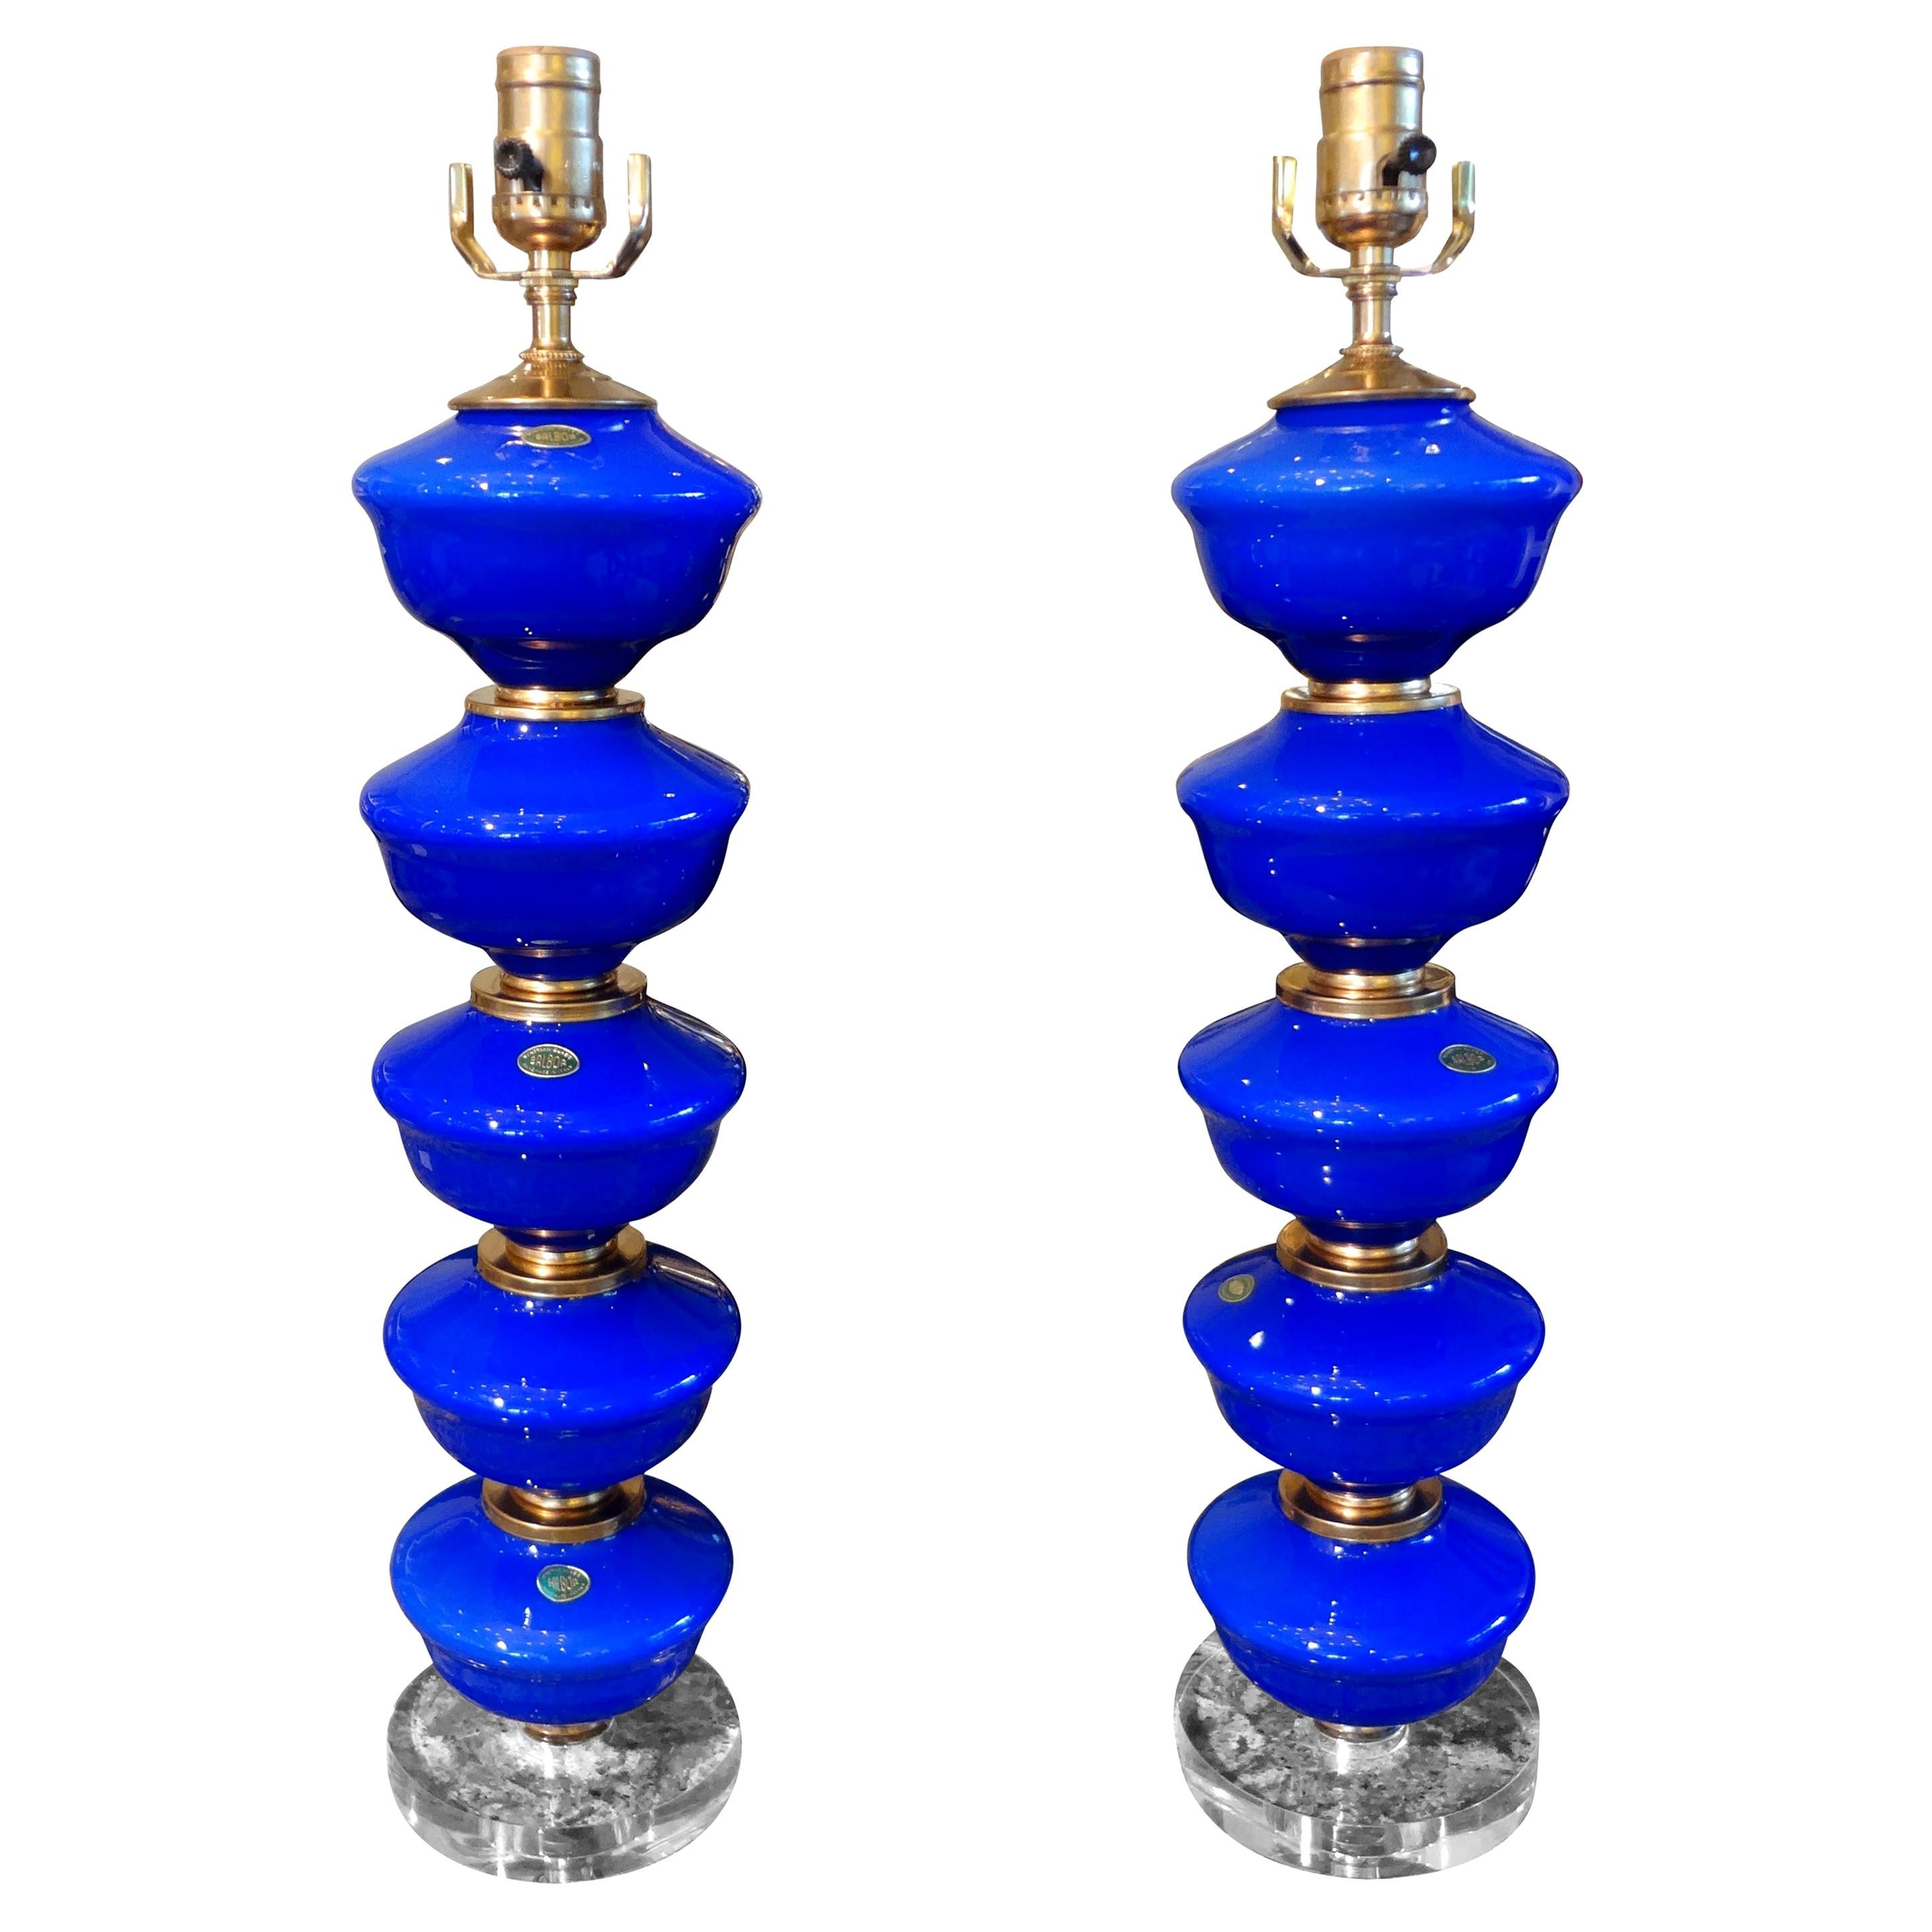 Pair of Cobalt Blue Murano Glass Lamps by Balboa